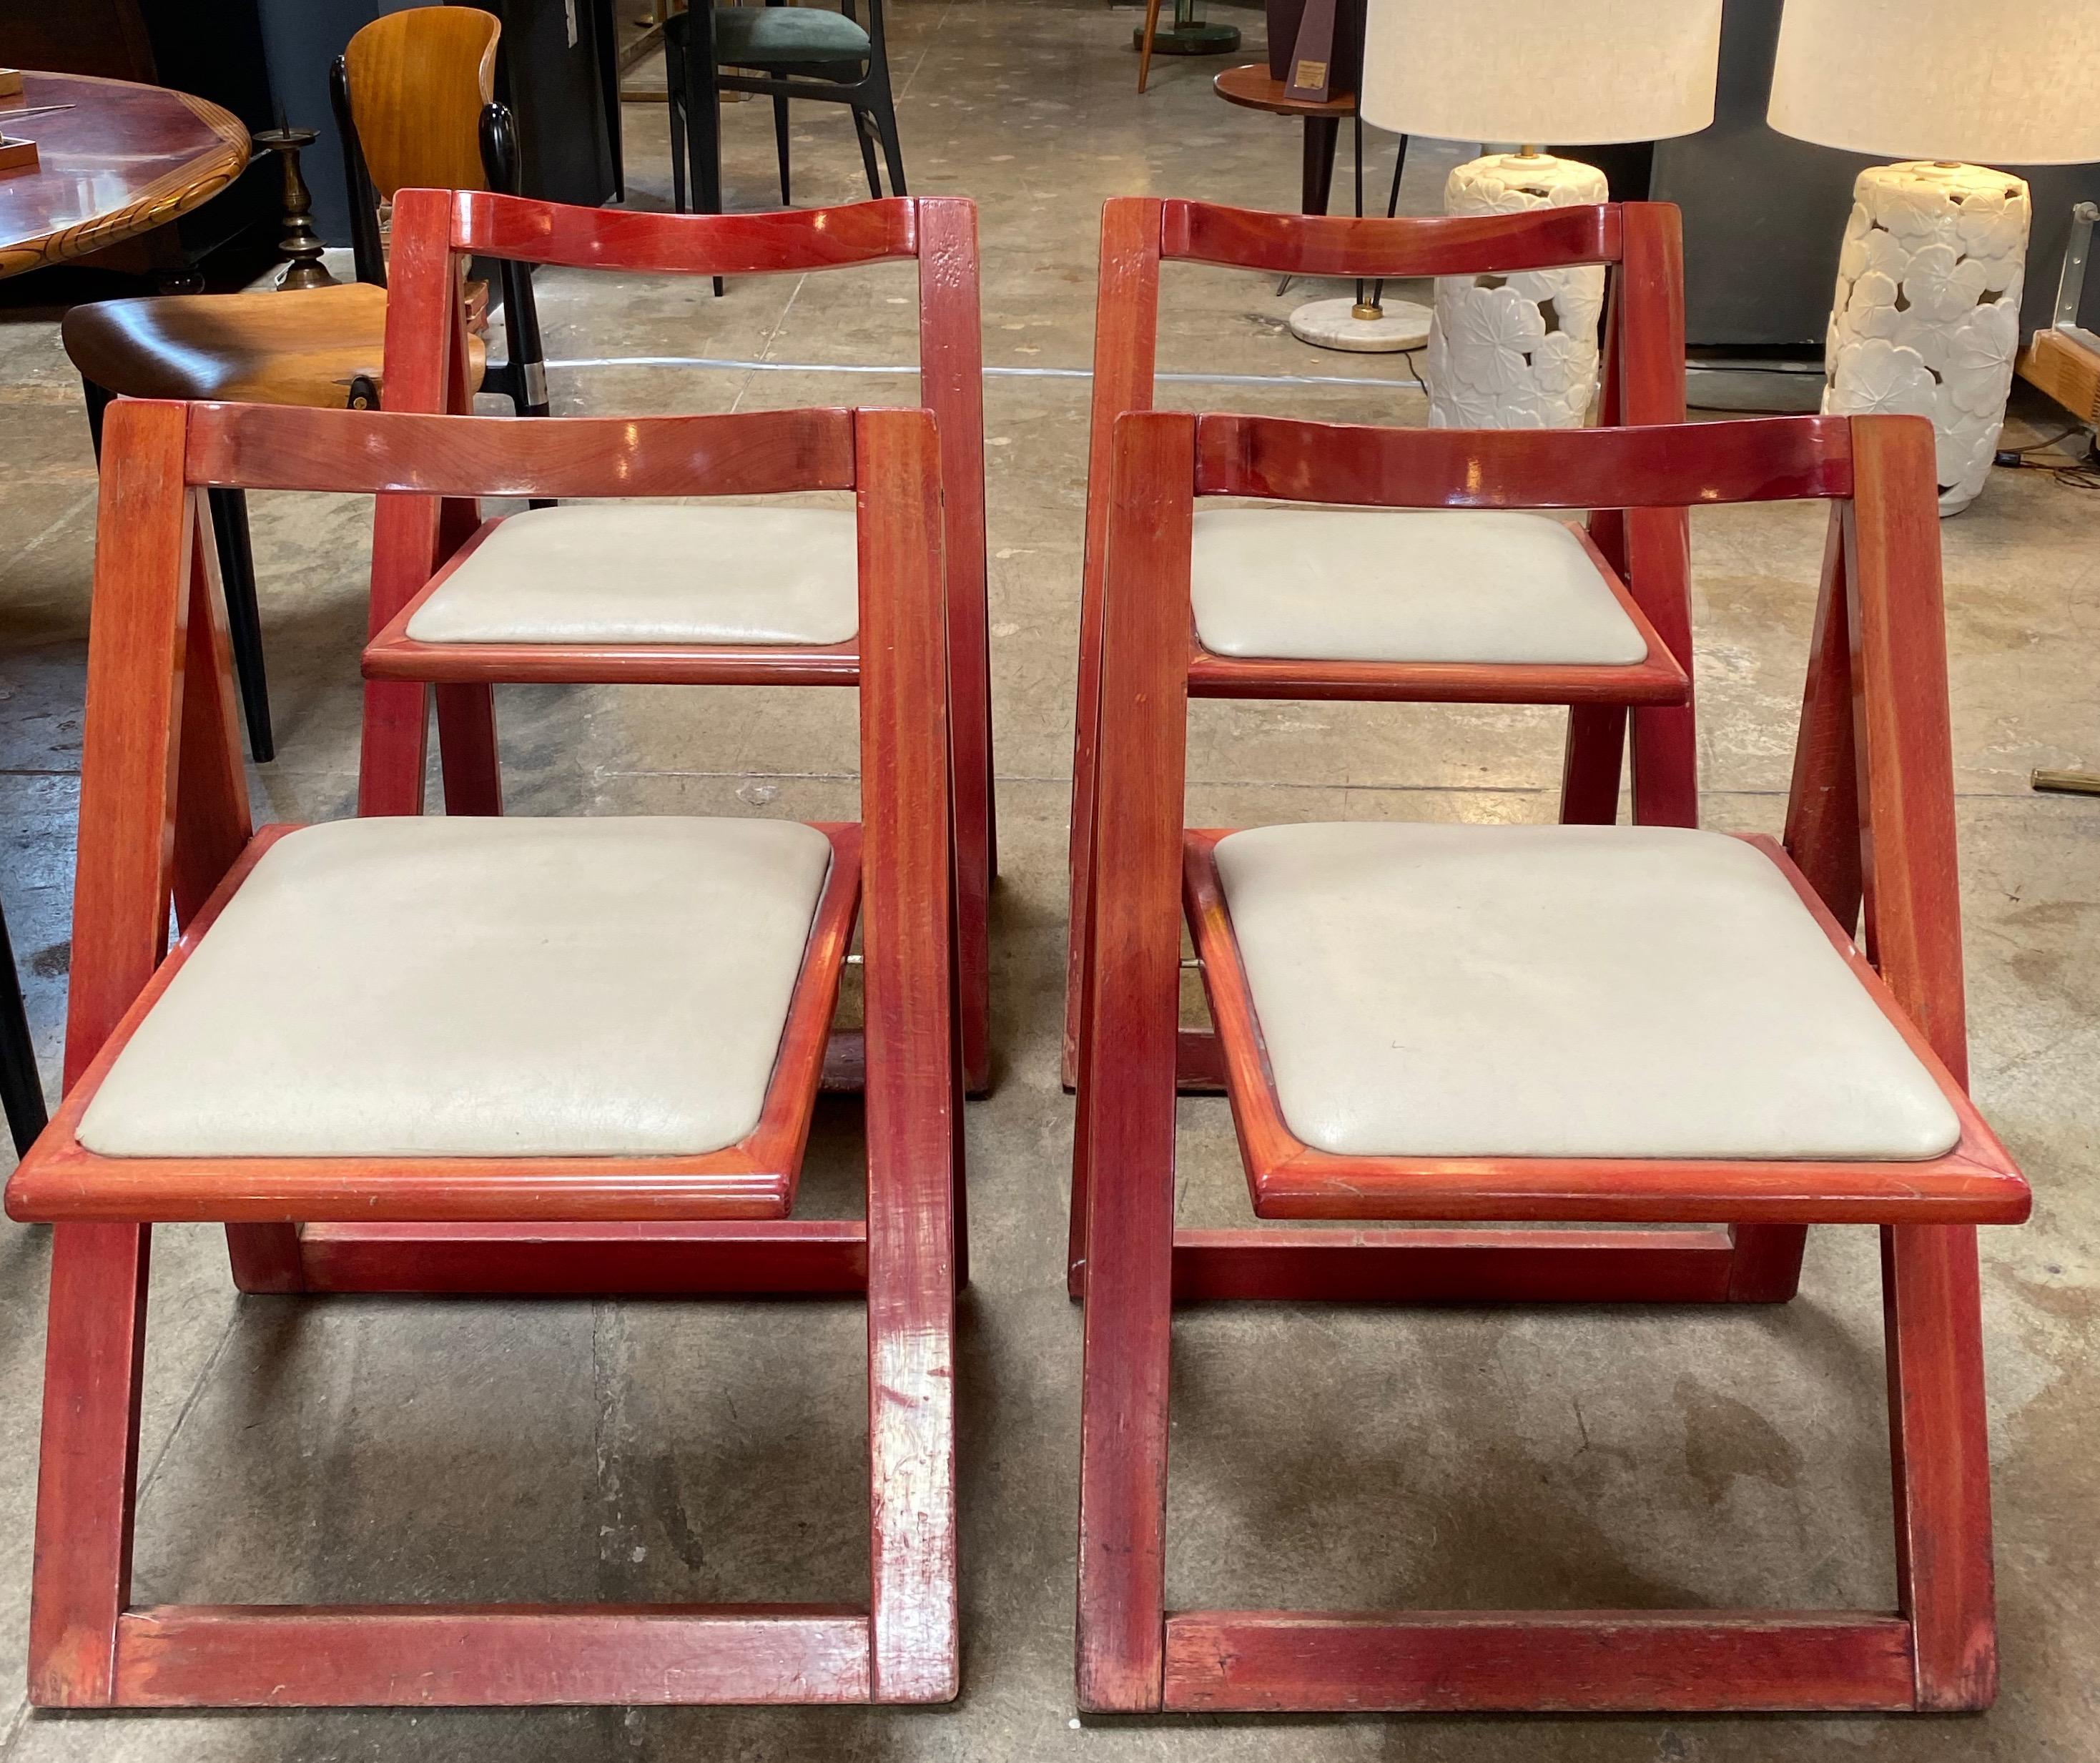 trieste chairs